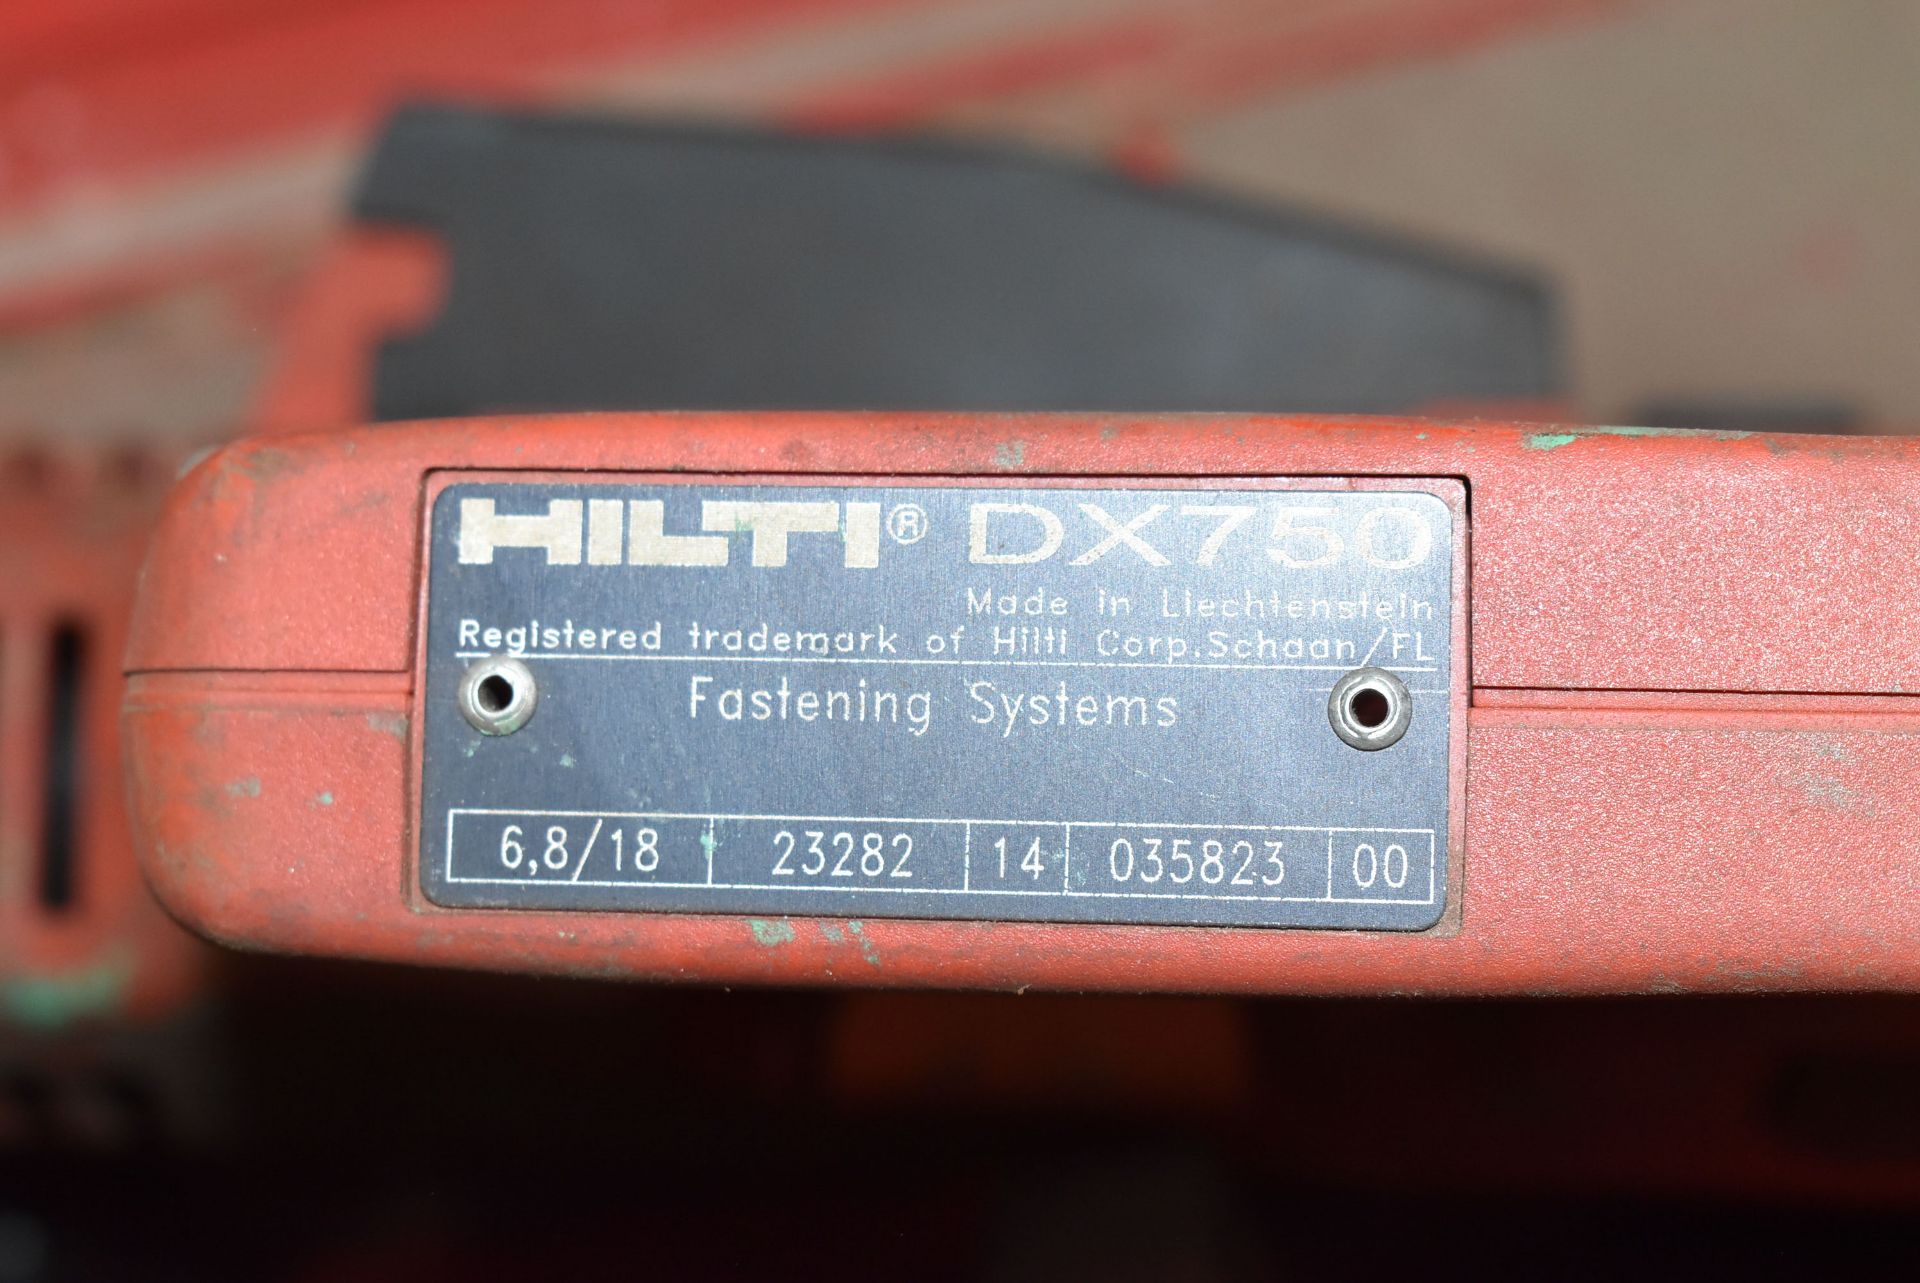 LOT/ HILTI DX460 FULLY AUTOMATIC POWER-ACTUATED FASTENING TOOL WITH HILTI MX72 NAIL MAGAZINE & HILTI - Image 6 of 6